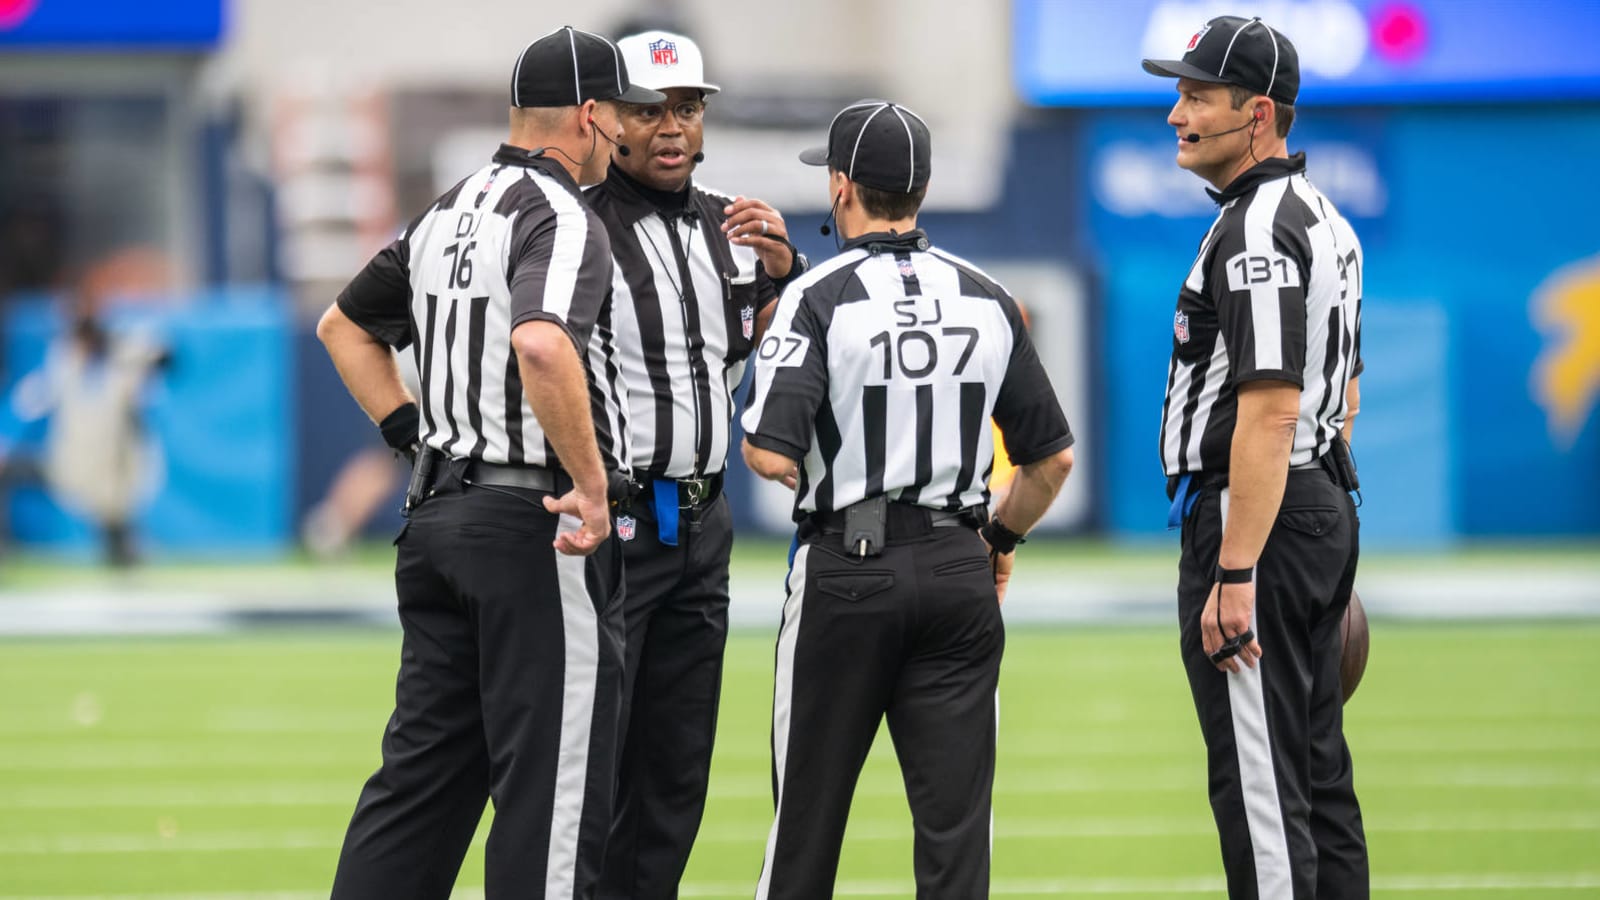 From Harvard to Super Bowl: Ron Torbert to referee Sunday's game